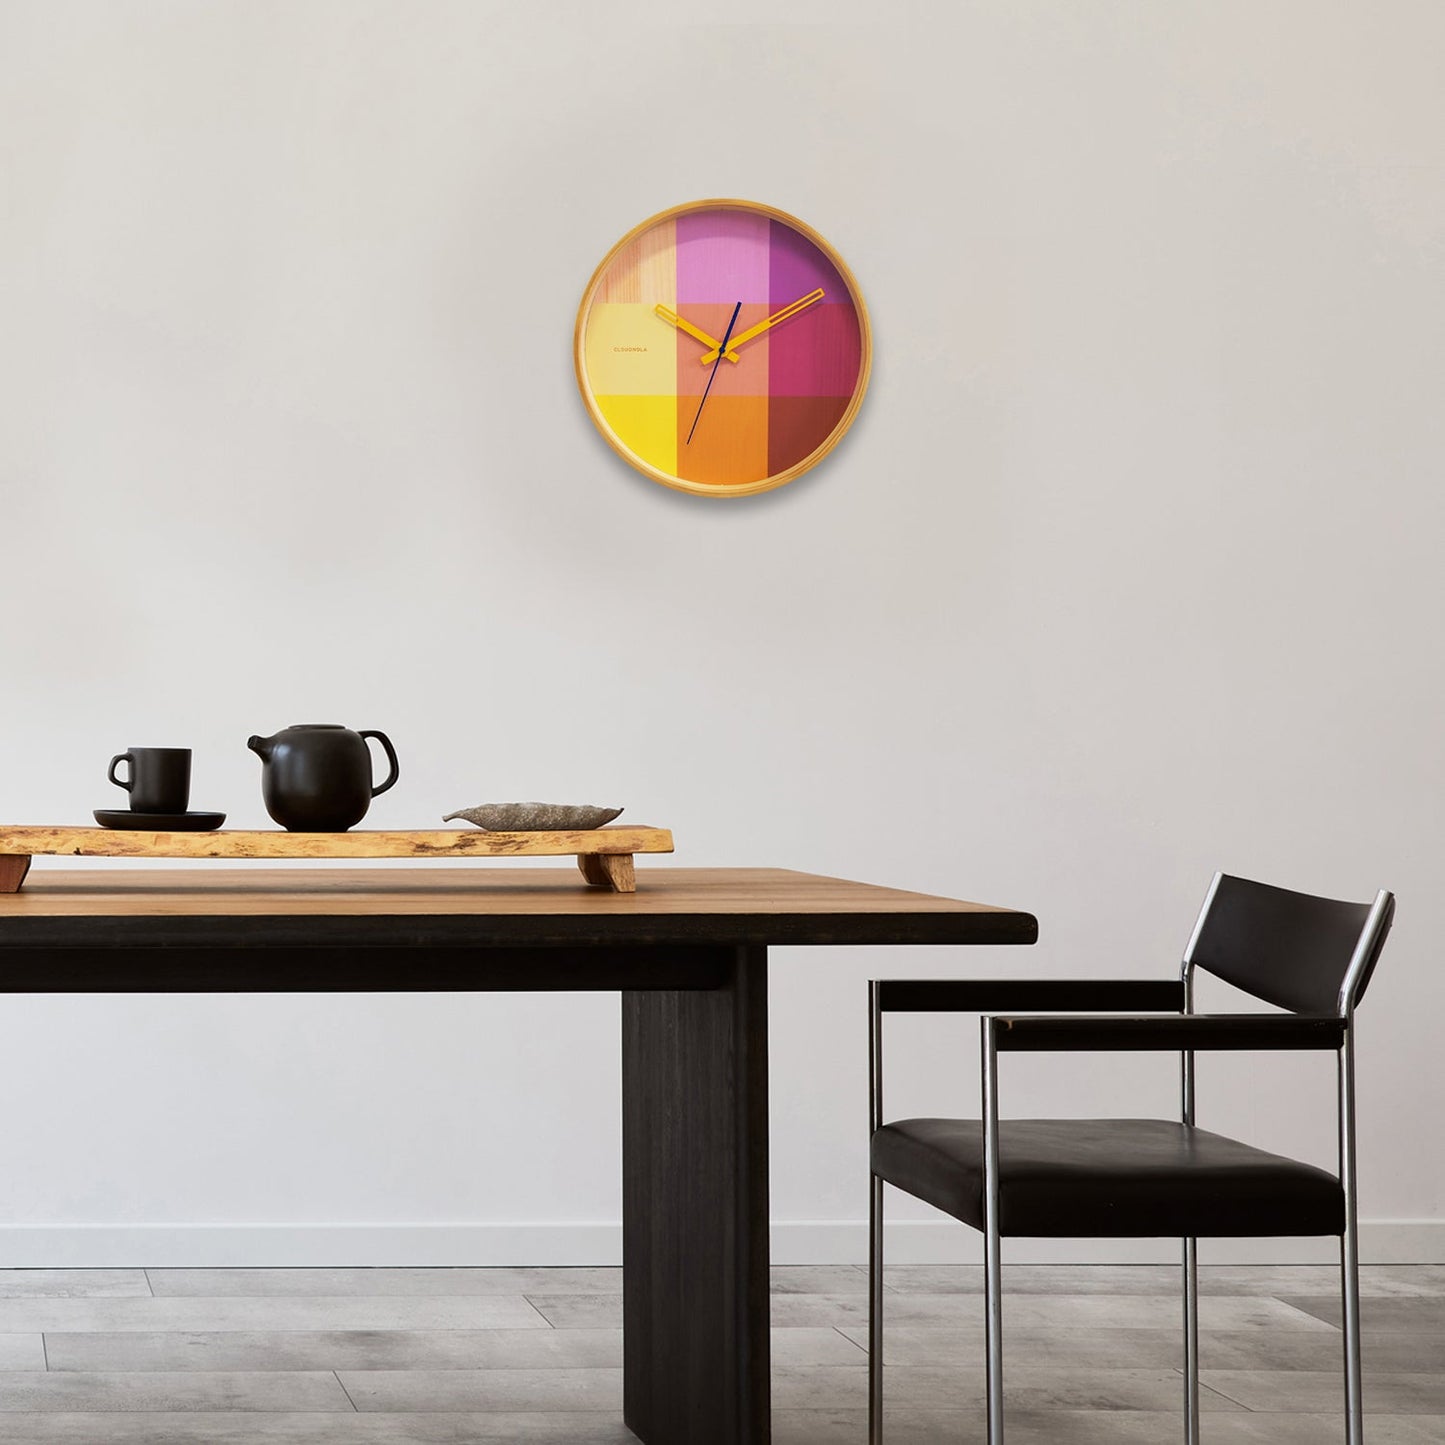 SAMPLE - Riso Magenta & Yellow Wall Clock - Wooden Artistry - Bold Timepiece